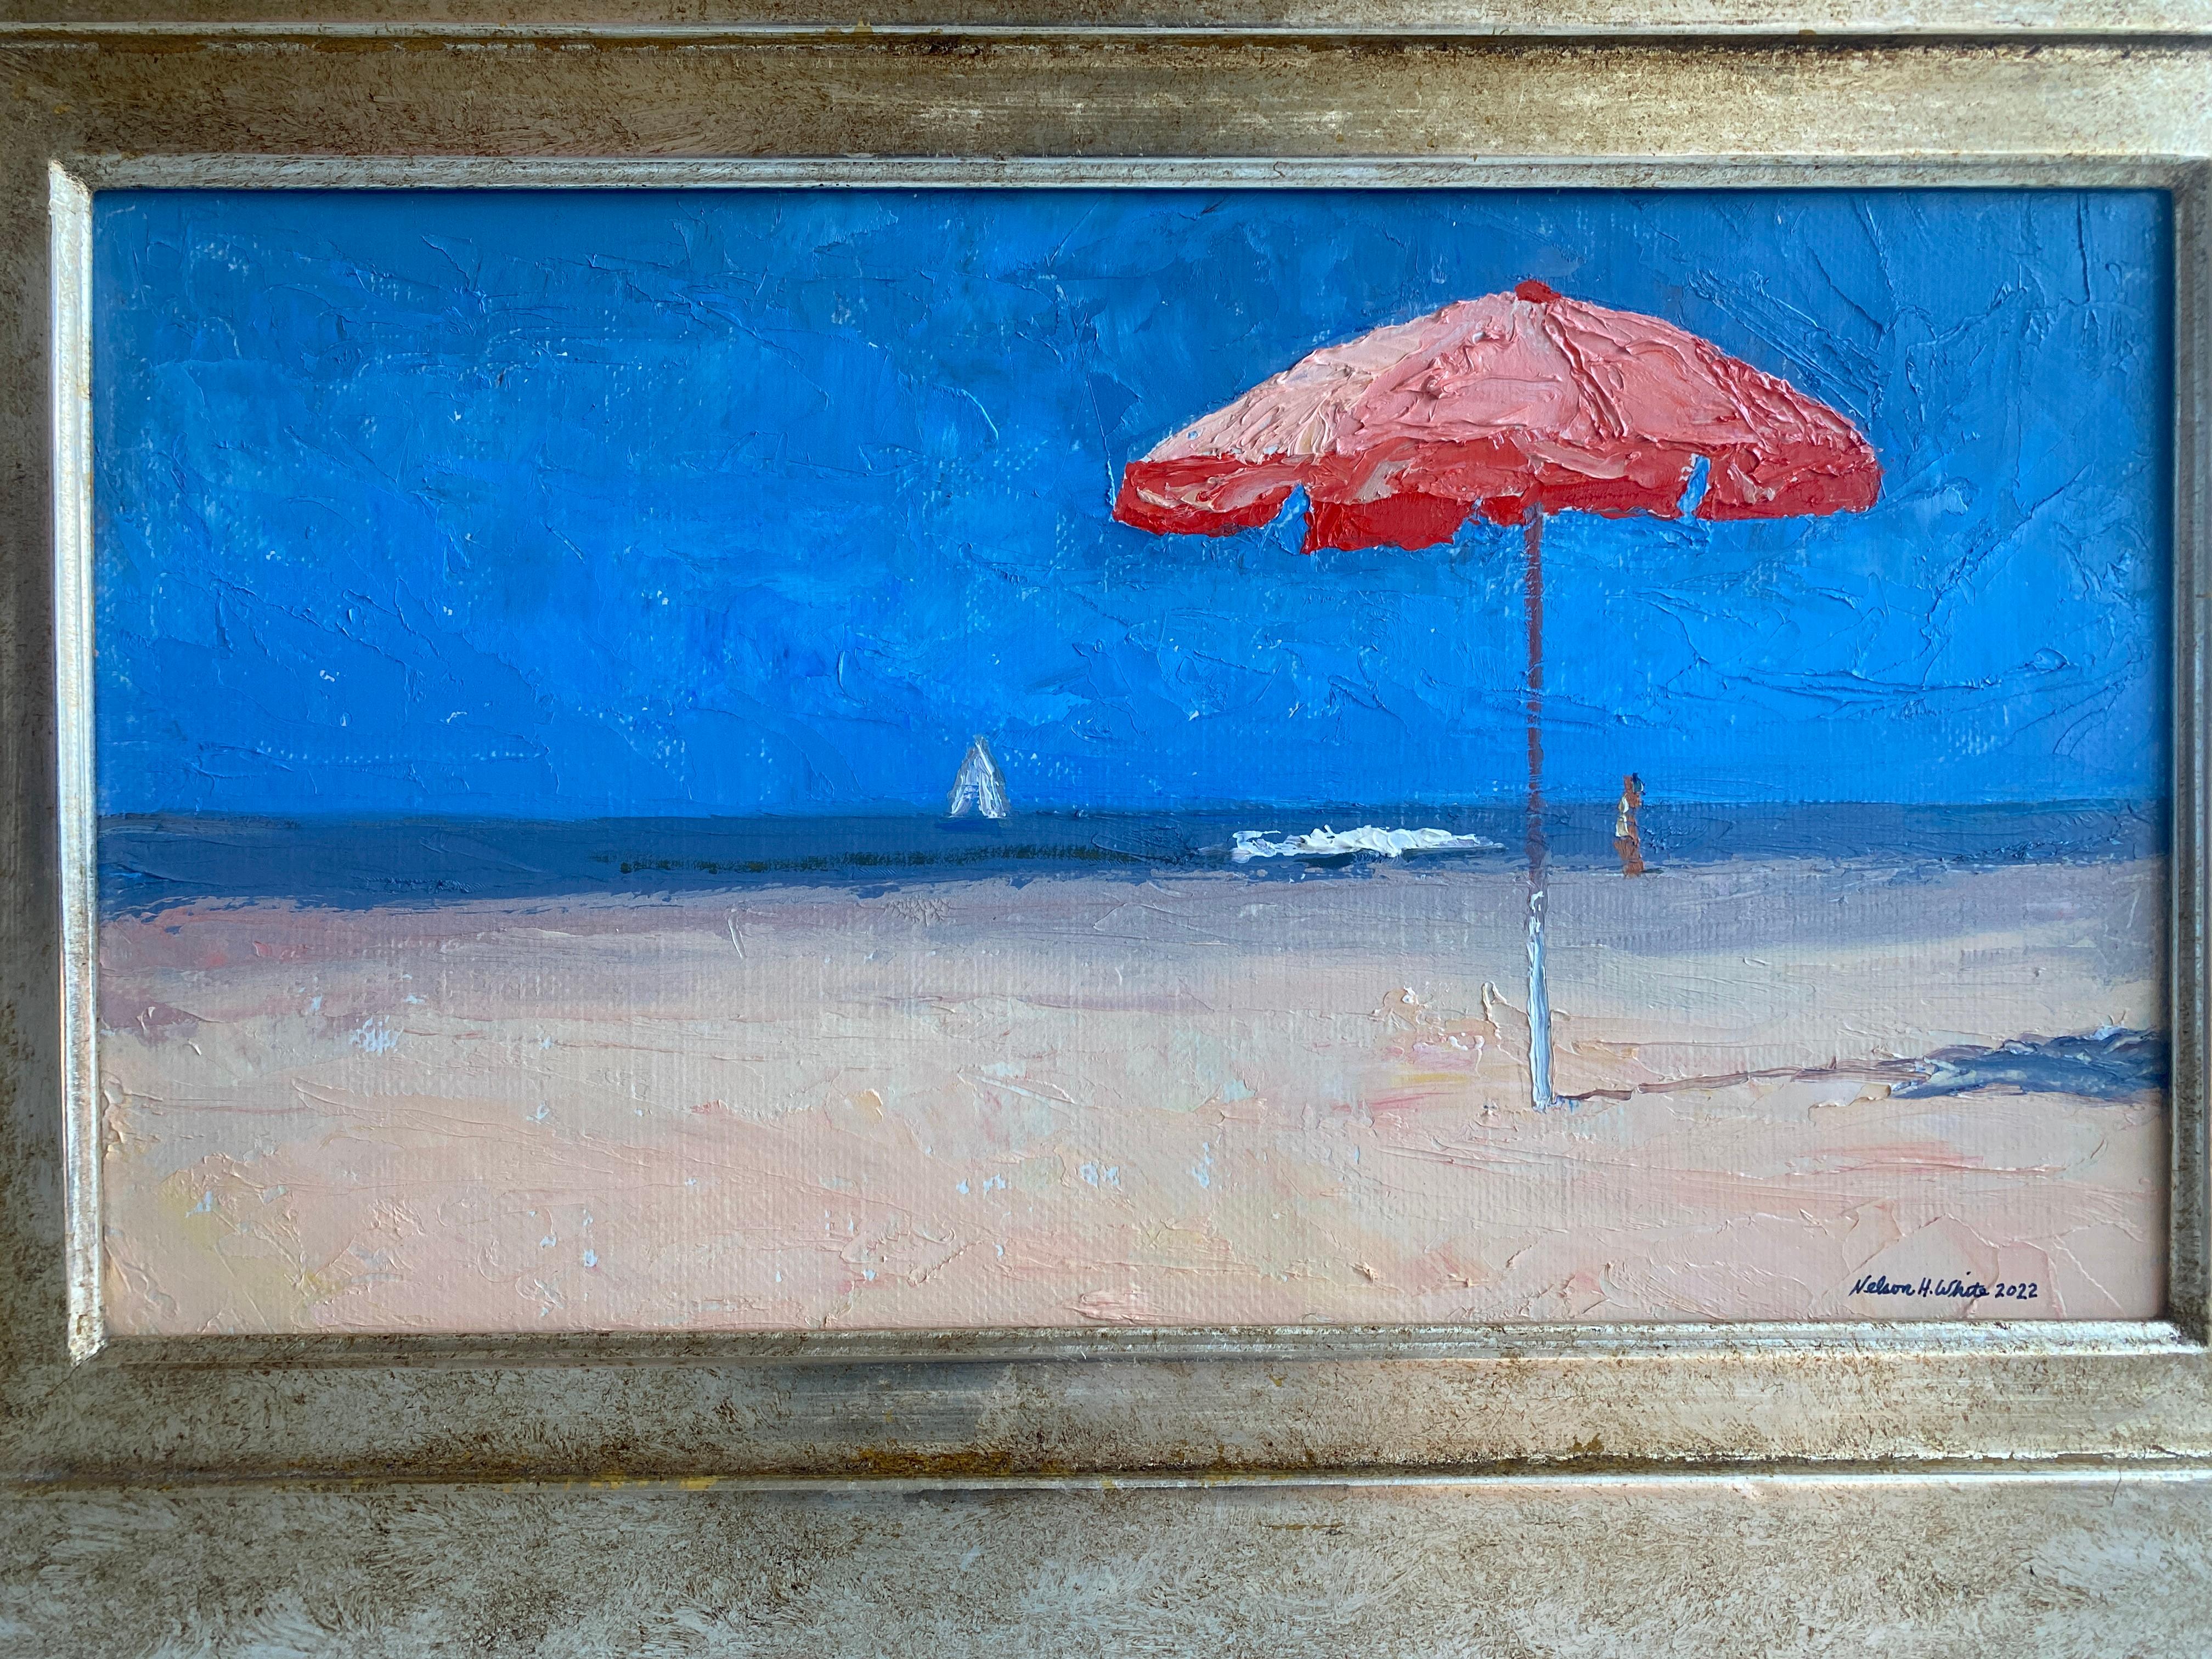 A plein air painting of Nelson White's classic umbrella—a symbol of the quintessential summers day. His beach scenes have a way of taking his viewer into a world of nostalgia and the joy of a carefree moment. A vista of rich blue sky above a horizon